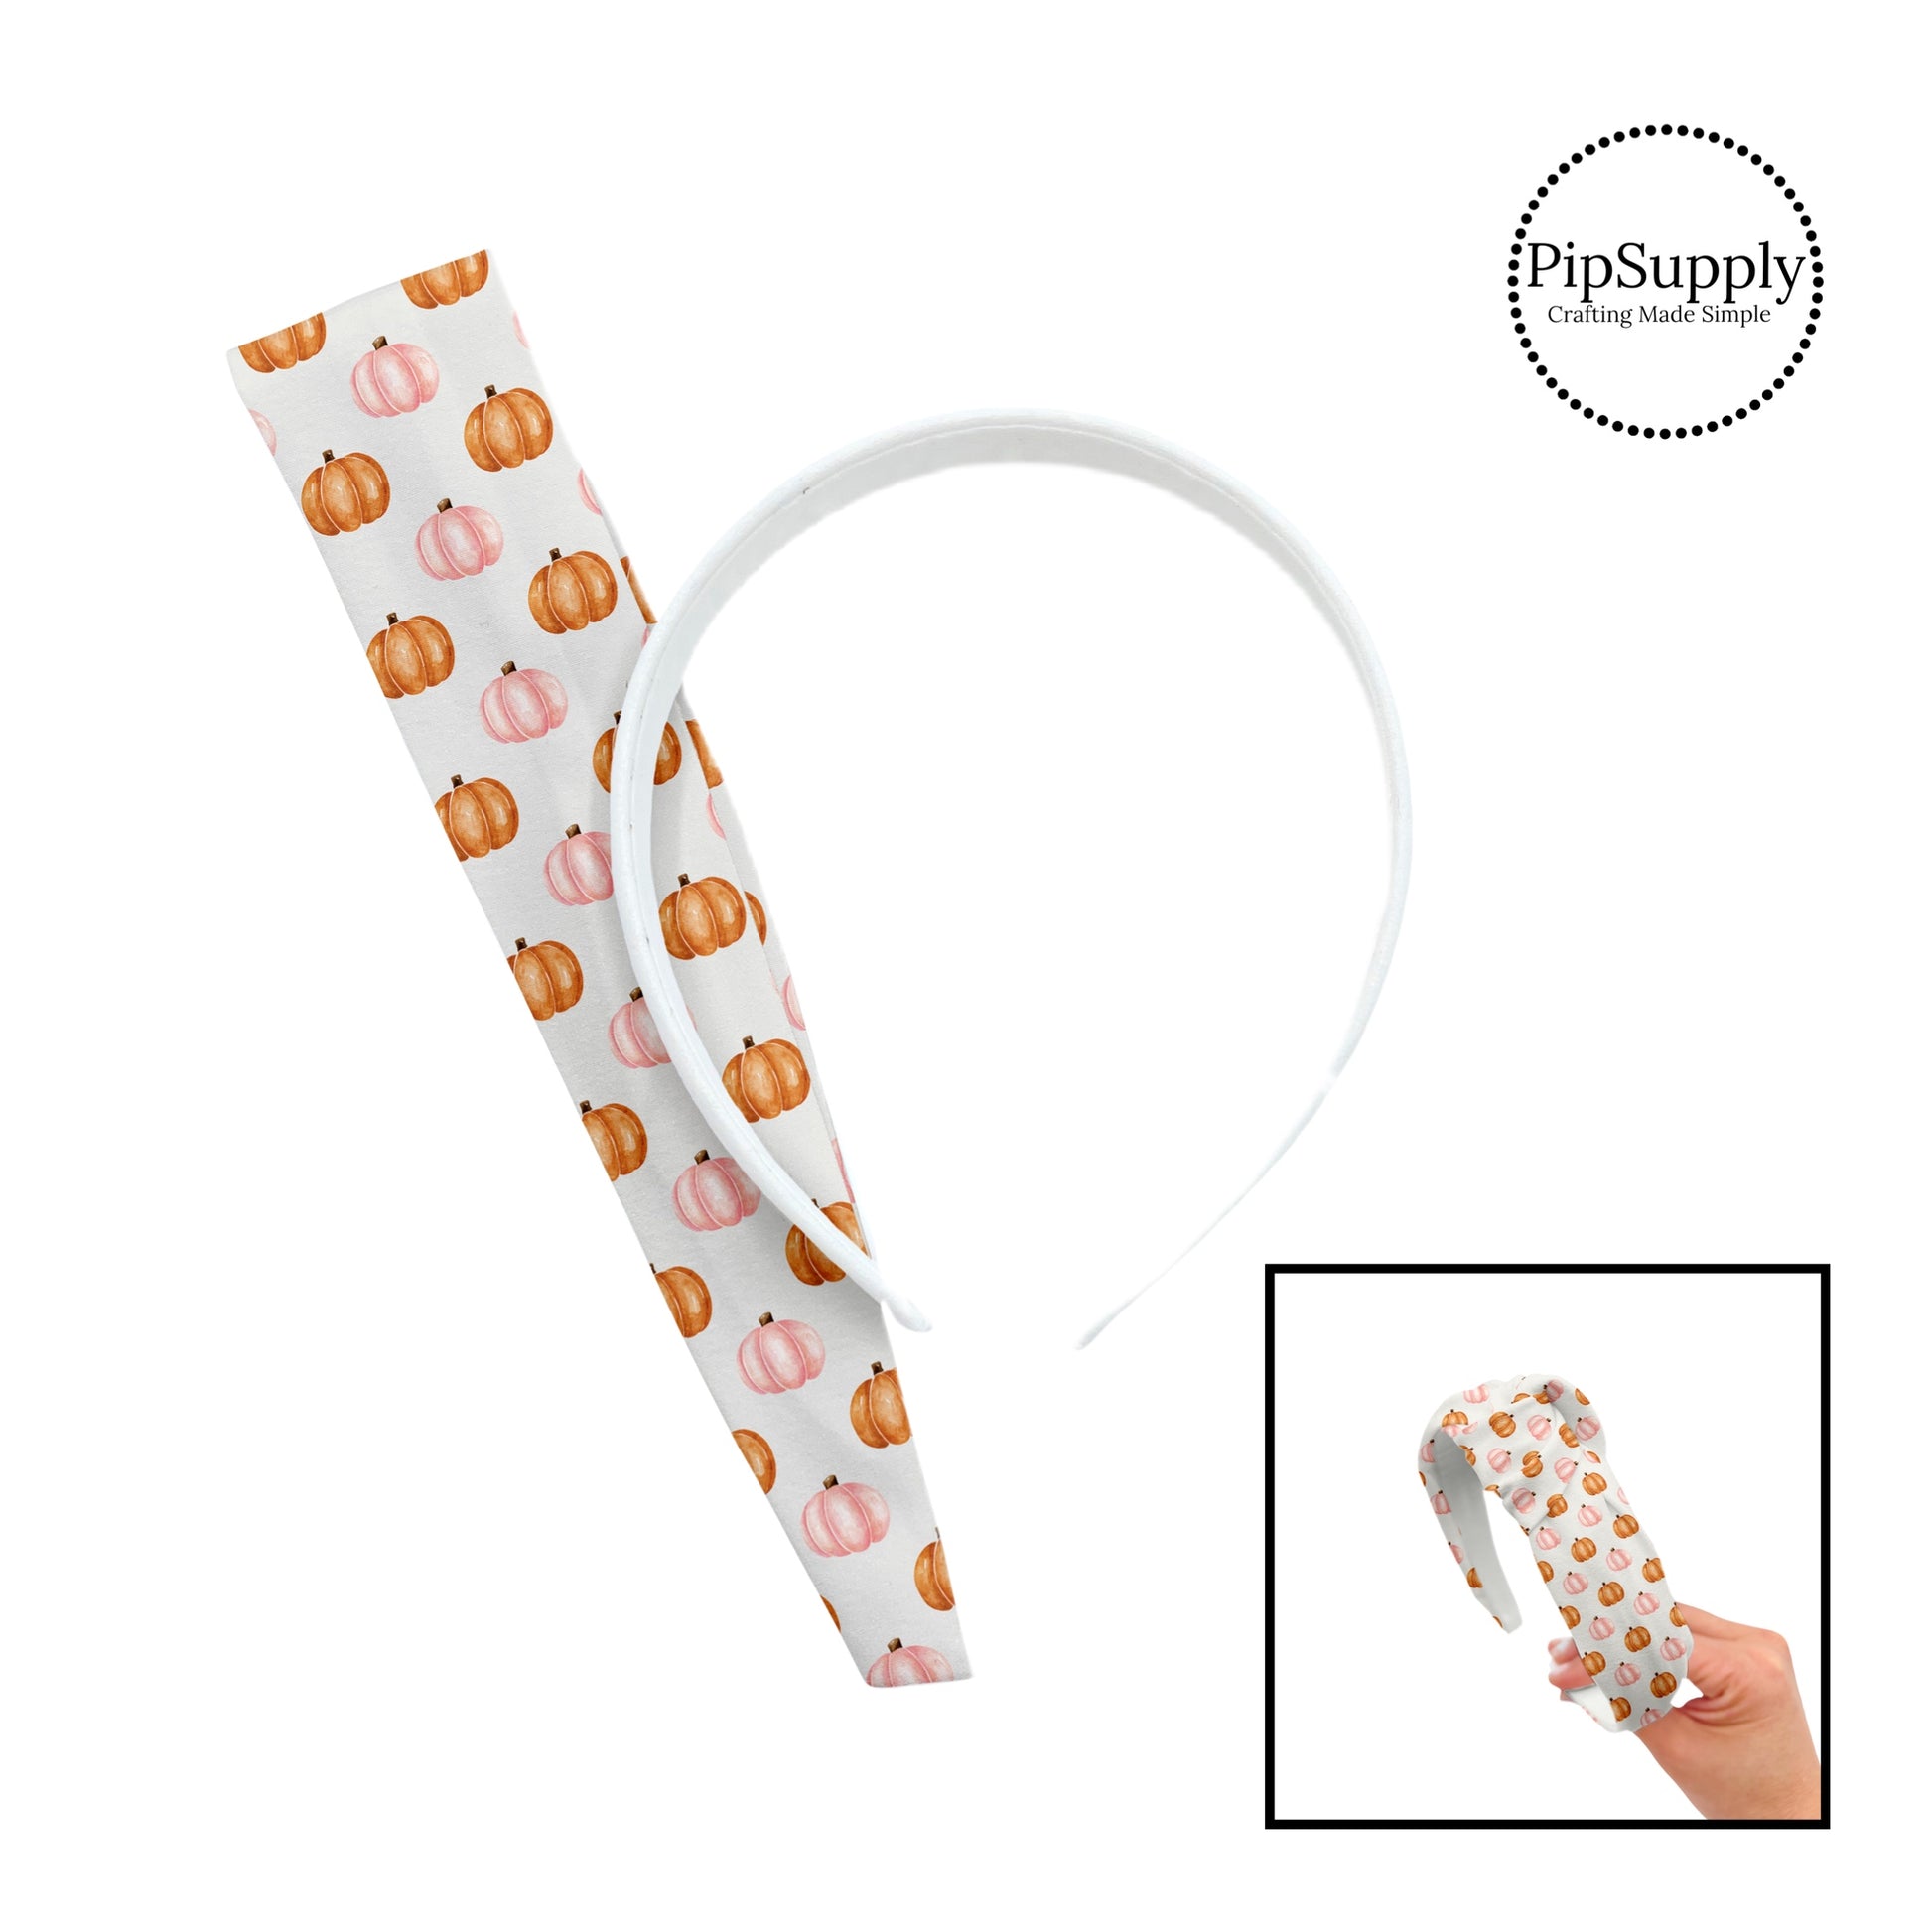 These Halloween themed cream headband kits are easy to assemble and come with everything you need to make your own knotted headband. These fun spooky kits include a custom printed and sewn fabric strip and a coordinating velvet headband. The headband kits features orange and light pink pumpkins on ivory. 